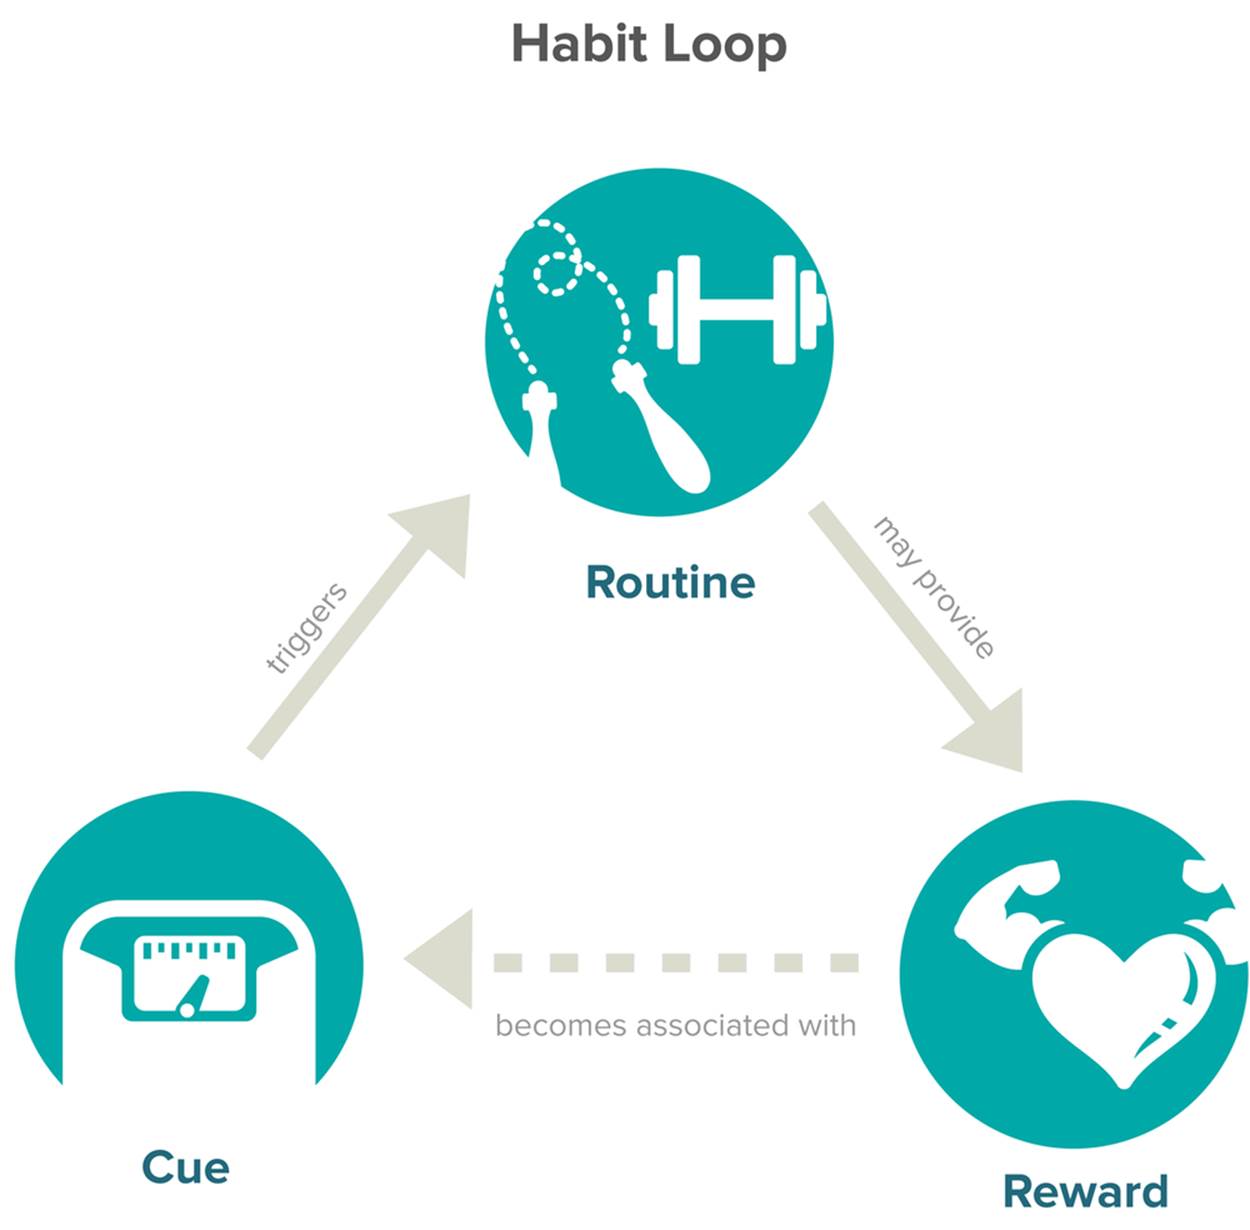 The cue-routine-reward process described by . For example, seeing the scale in the morning triggers the exercise routine. The immediate reward is a pleasant muscle burn.